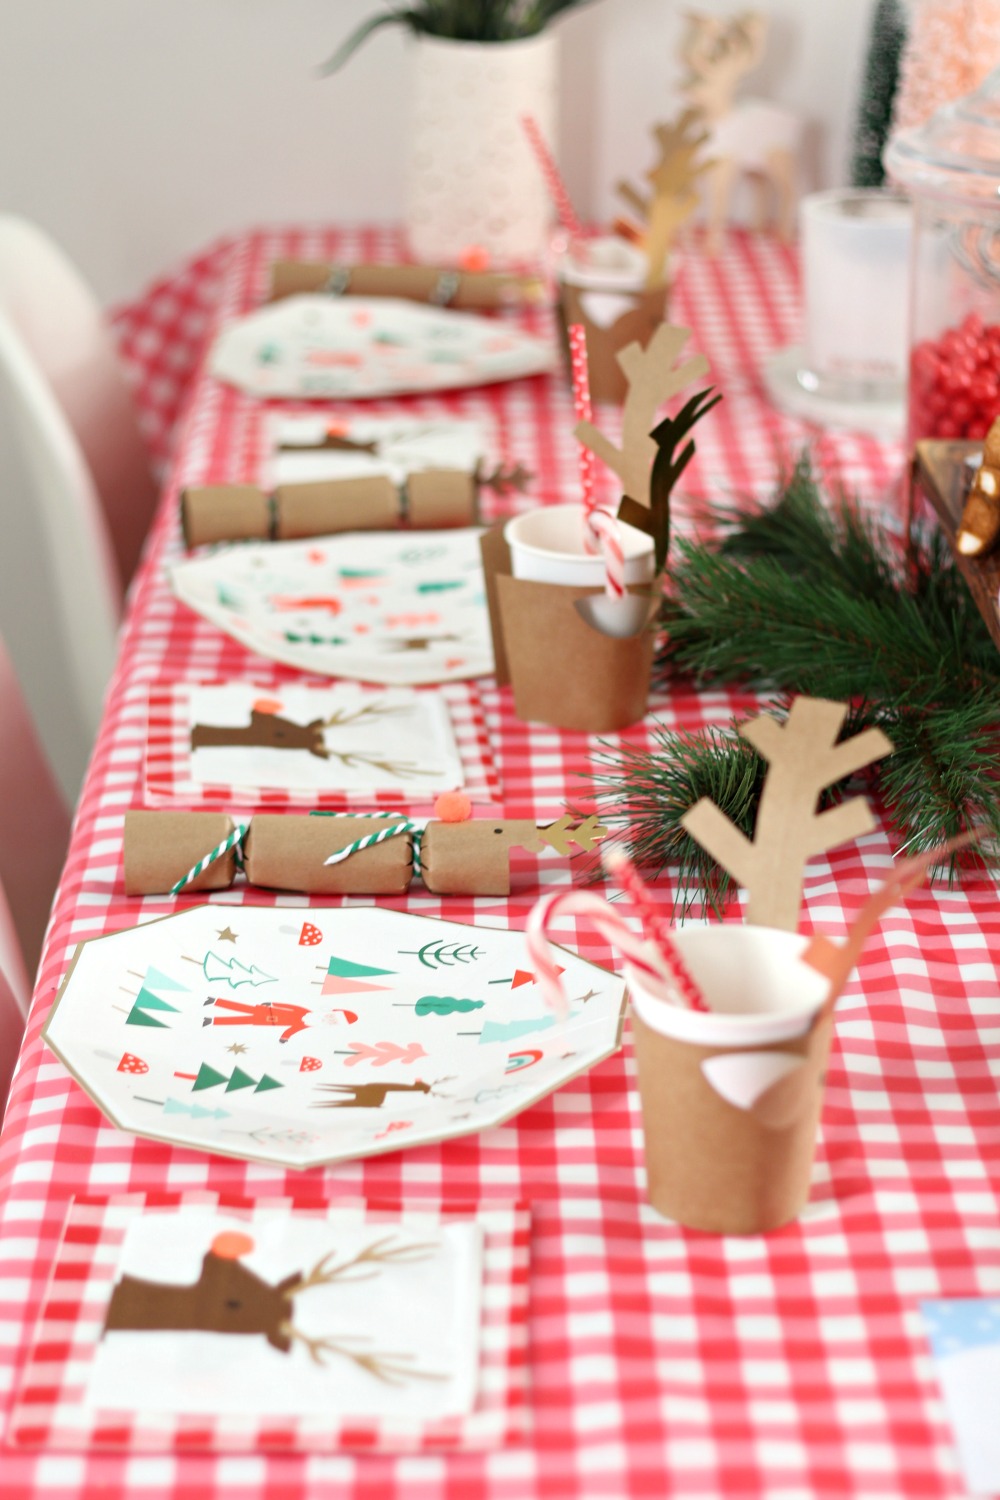 The Style Aesthetic | North Pole Breakfast Table